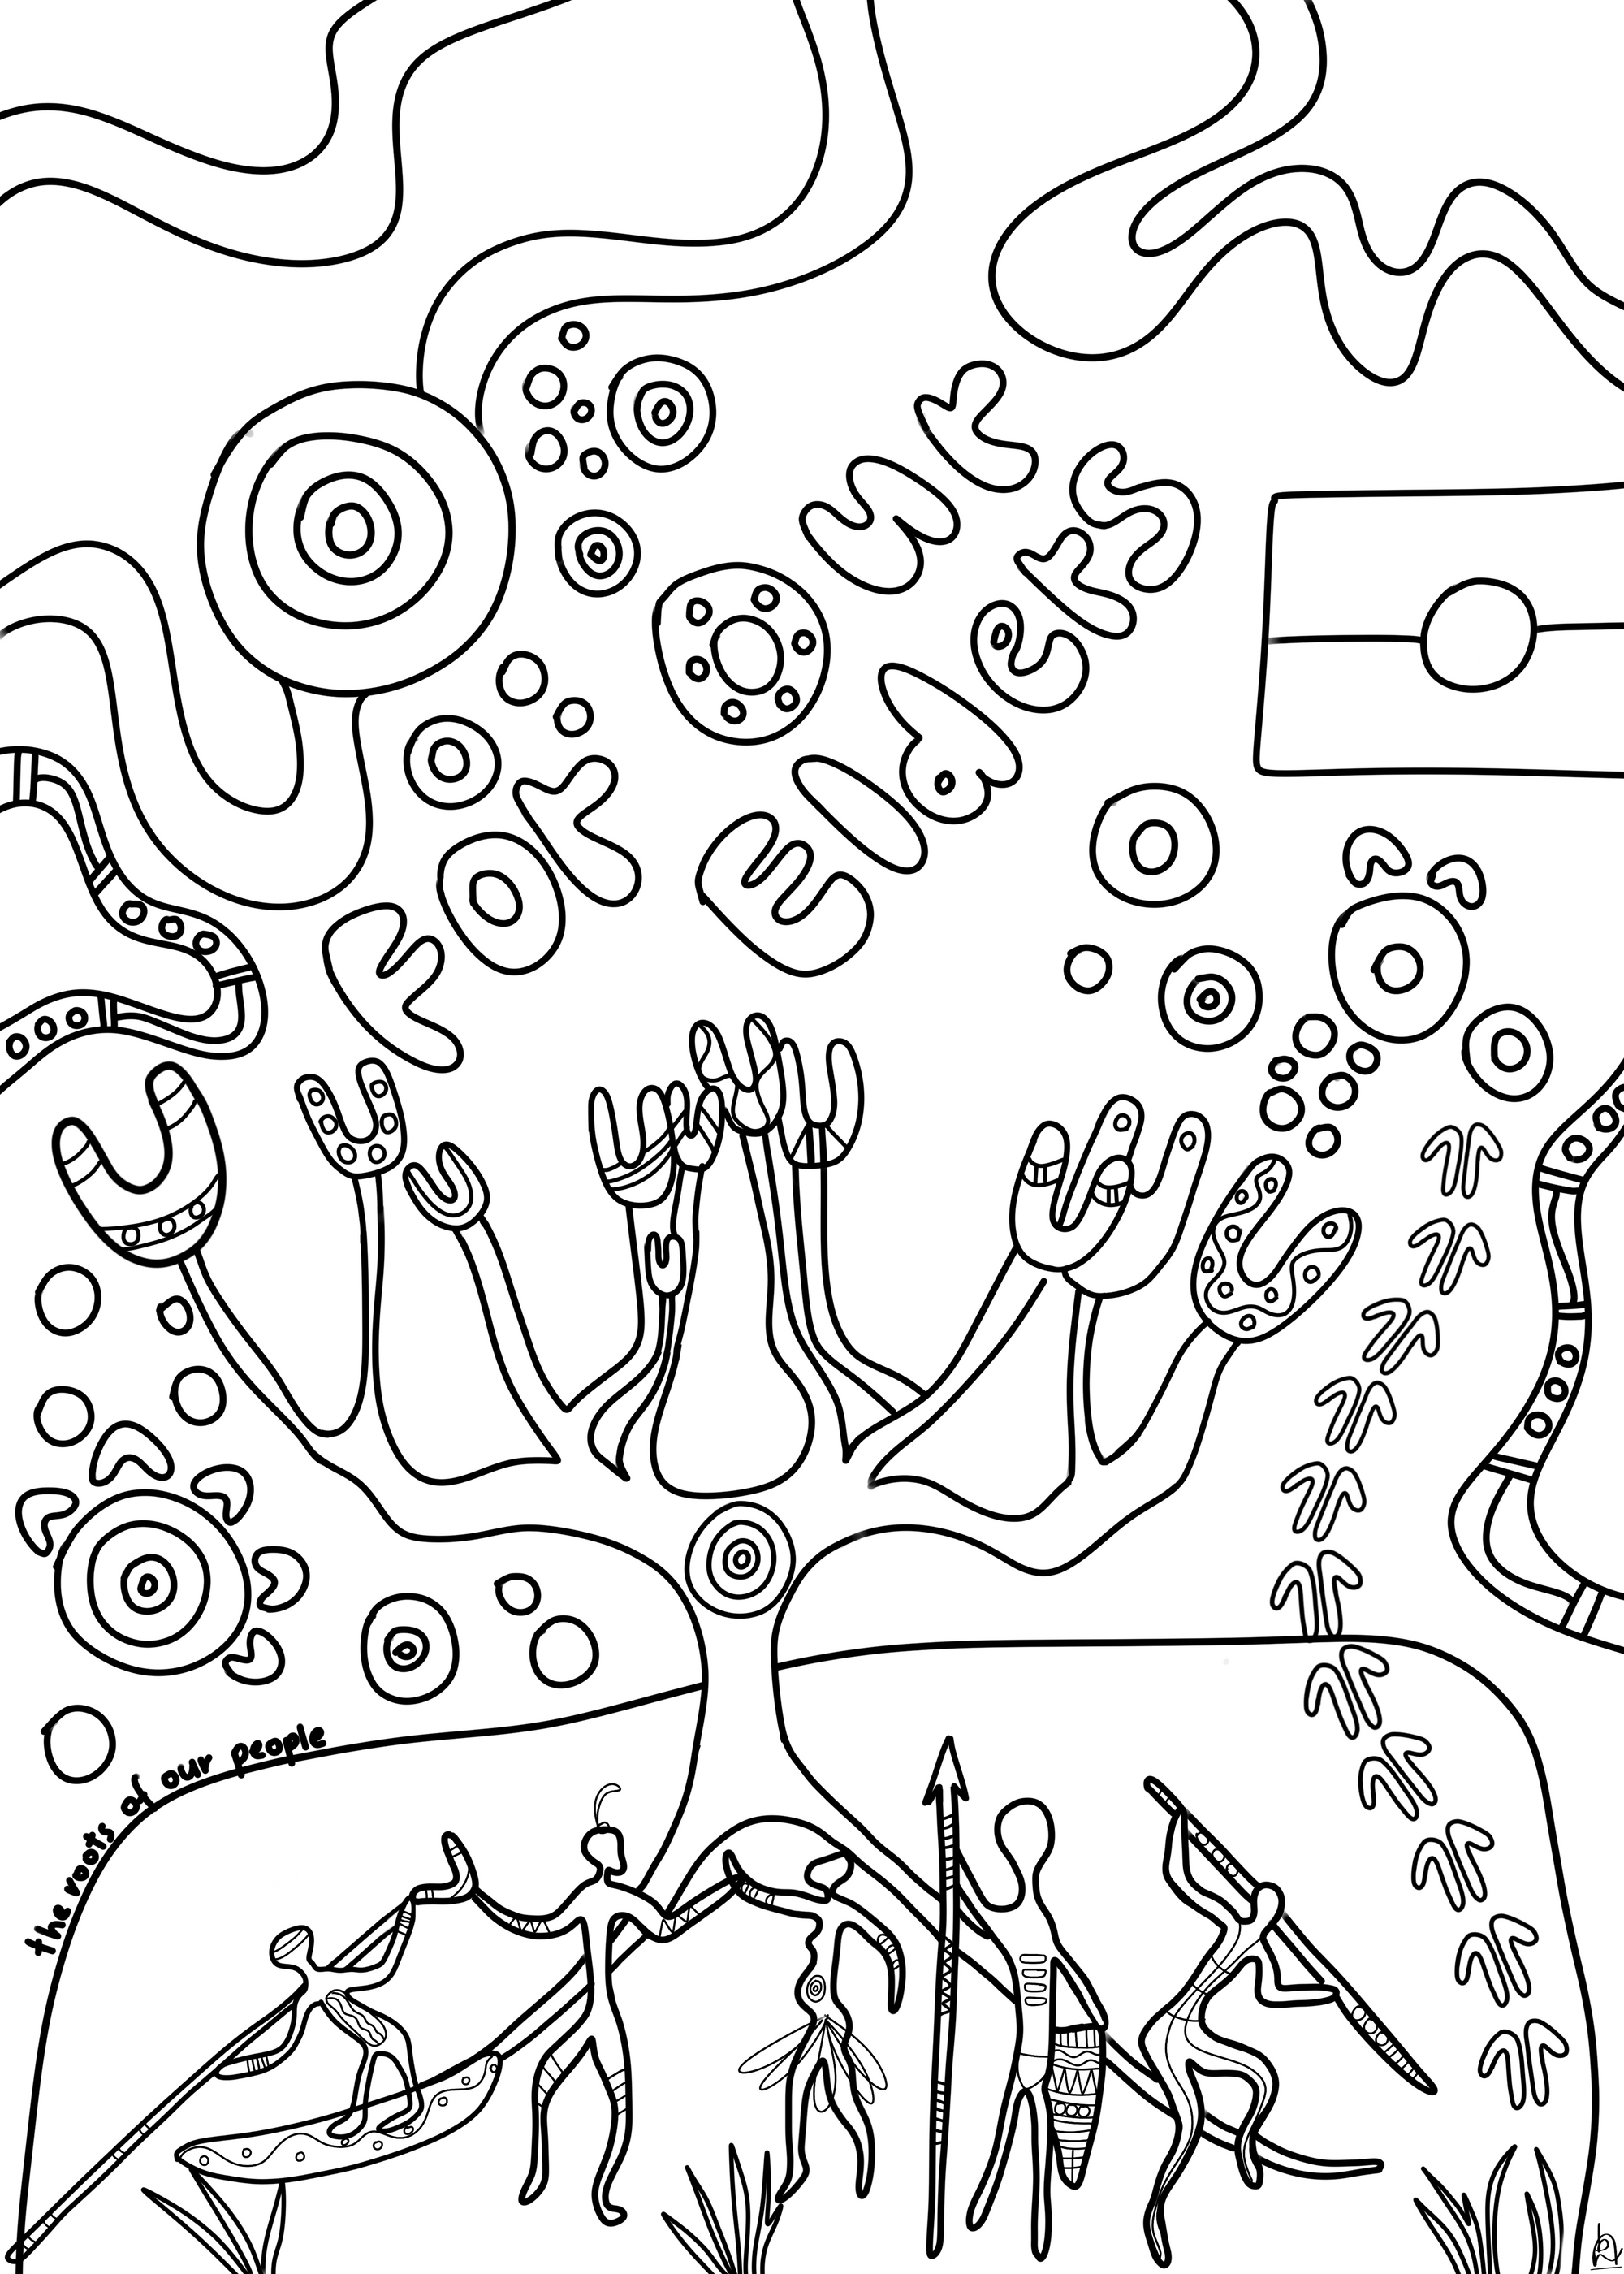 NAIDOC 2023 colour in ‘For Our elders’